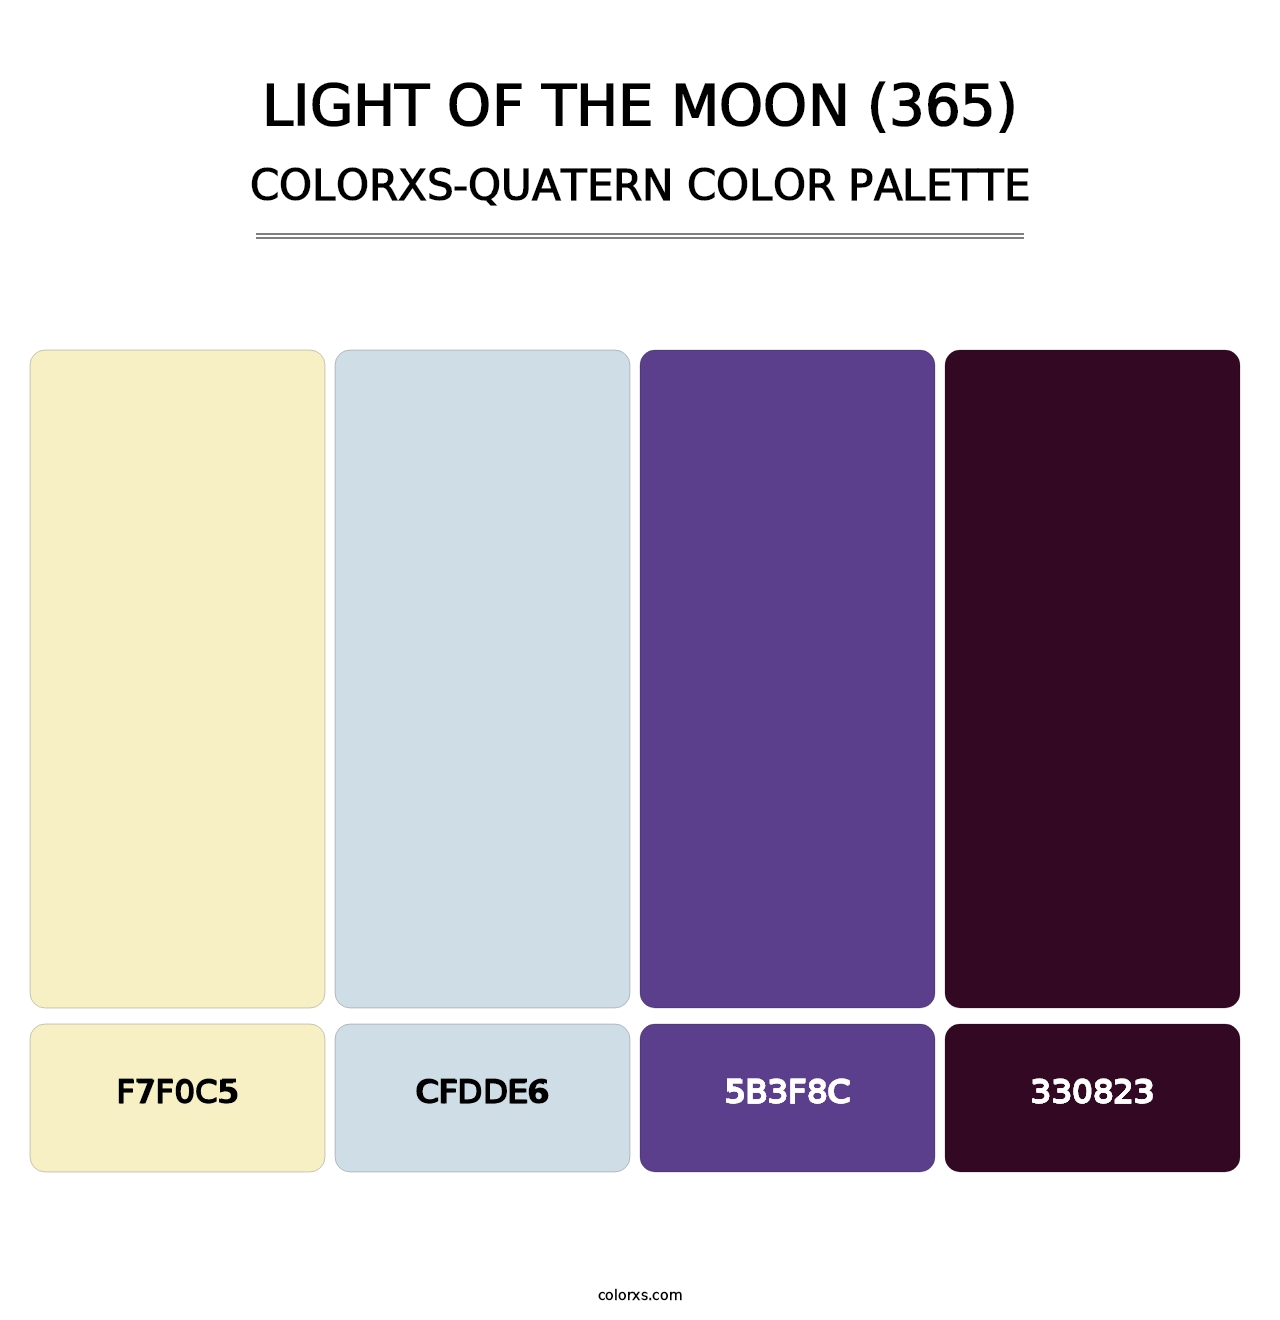 Light of the Moon (365) - Colorxs Quatern Palette